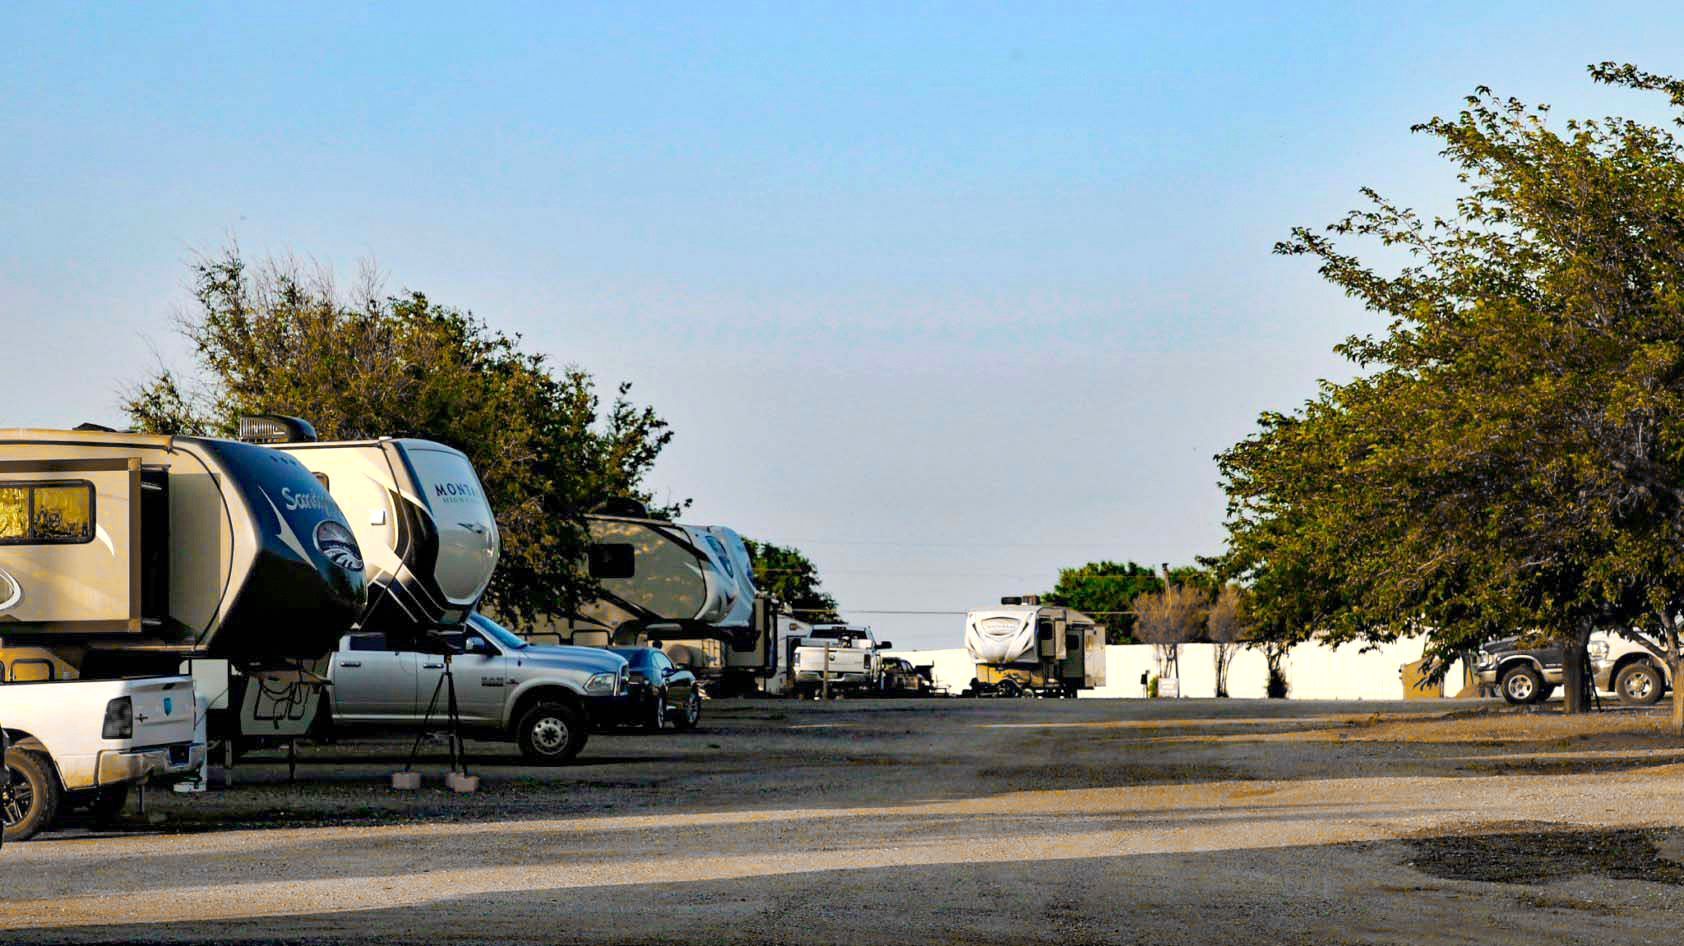 RV Parks and Campgrounds in Midland TX